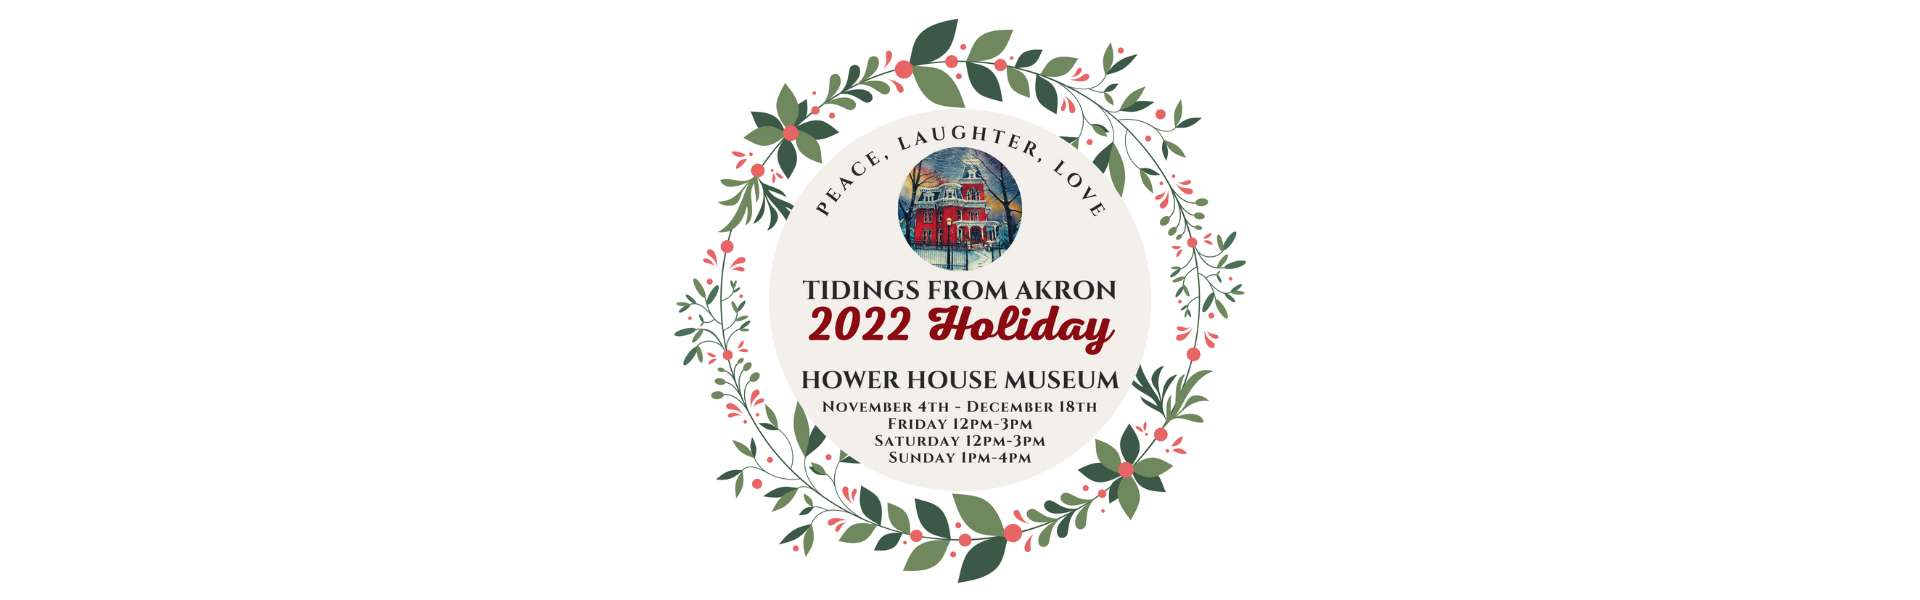 Peace, Laughter, Love: Tidings From Akron 2022 Holiday at Hower House Museum